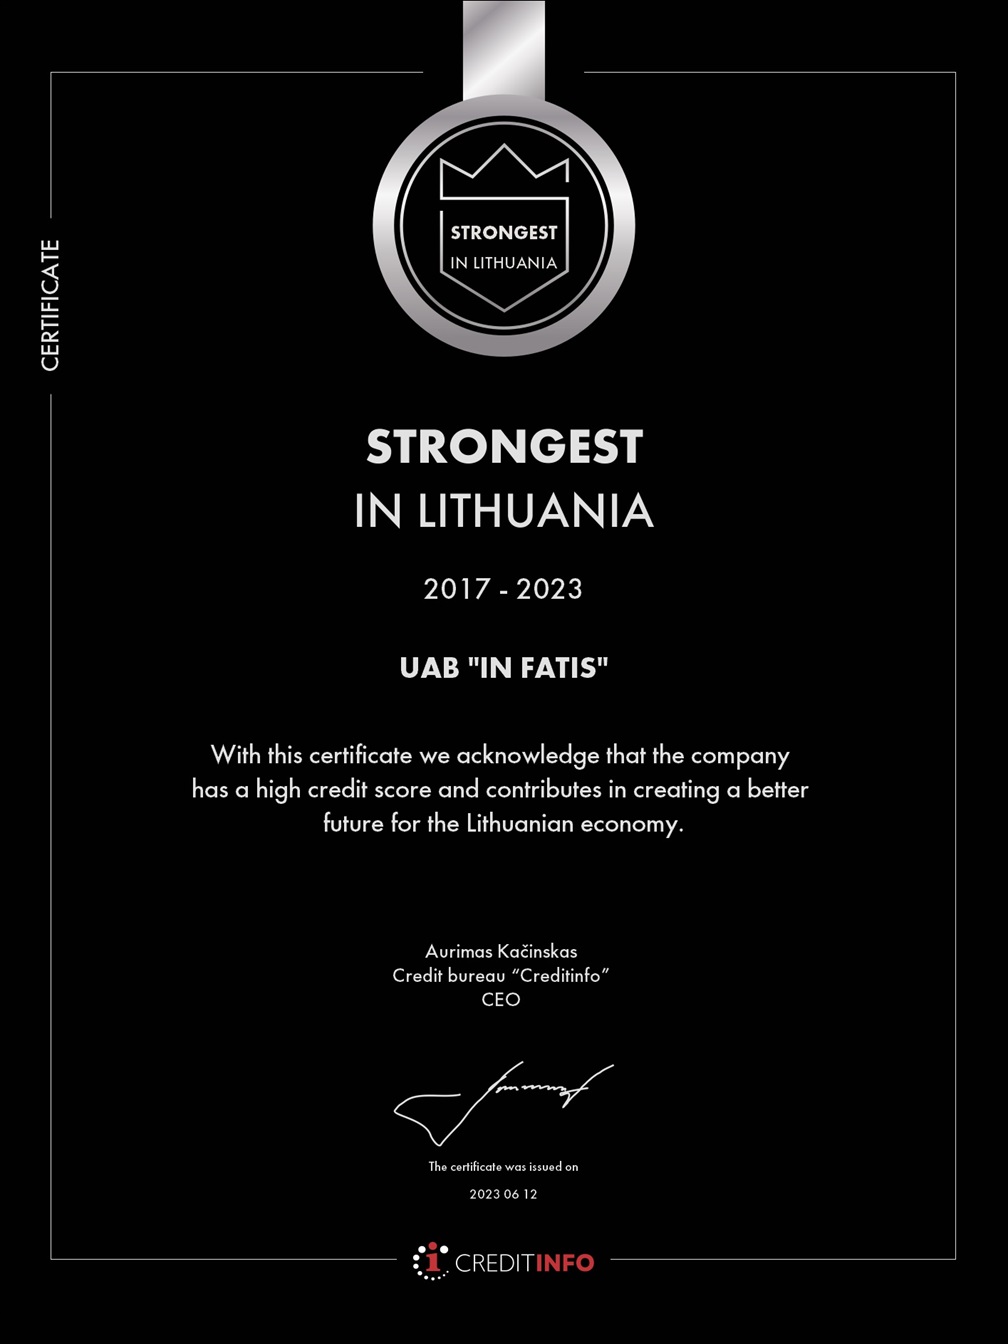 Strongest in Lithuania Certificate 2017-2023